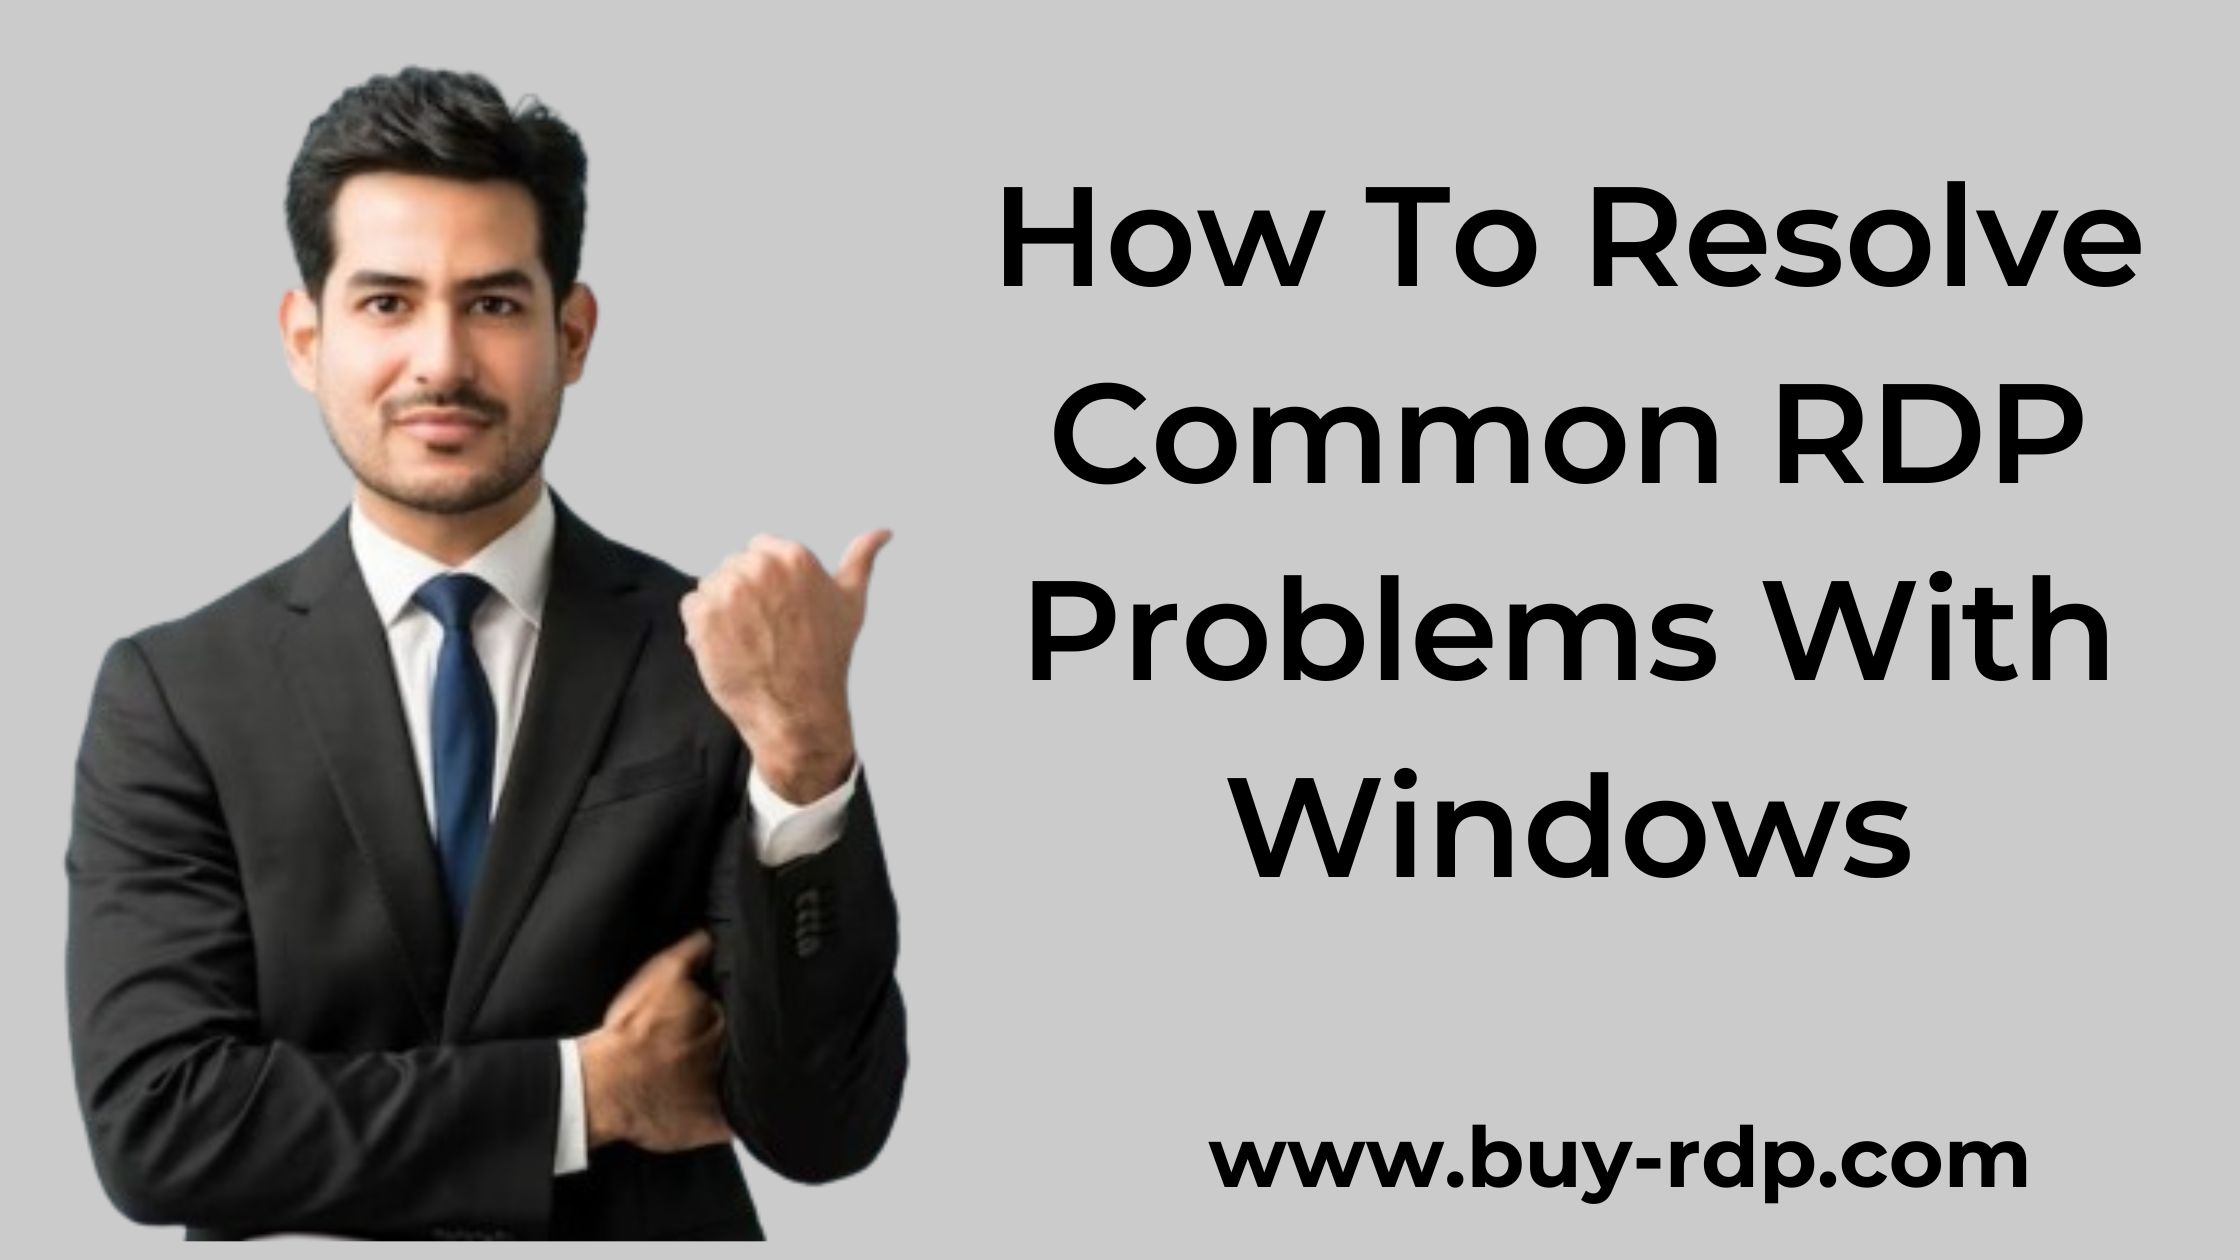 How to Resolve Common RDP Problems with Windows